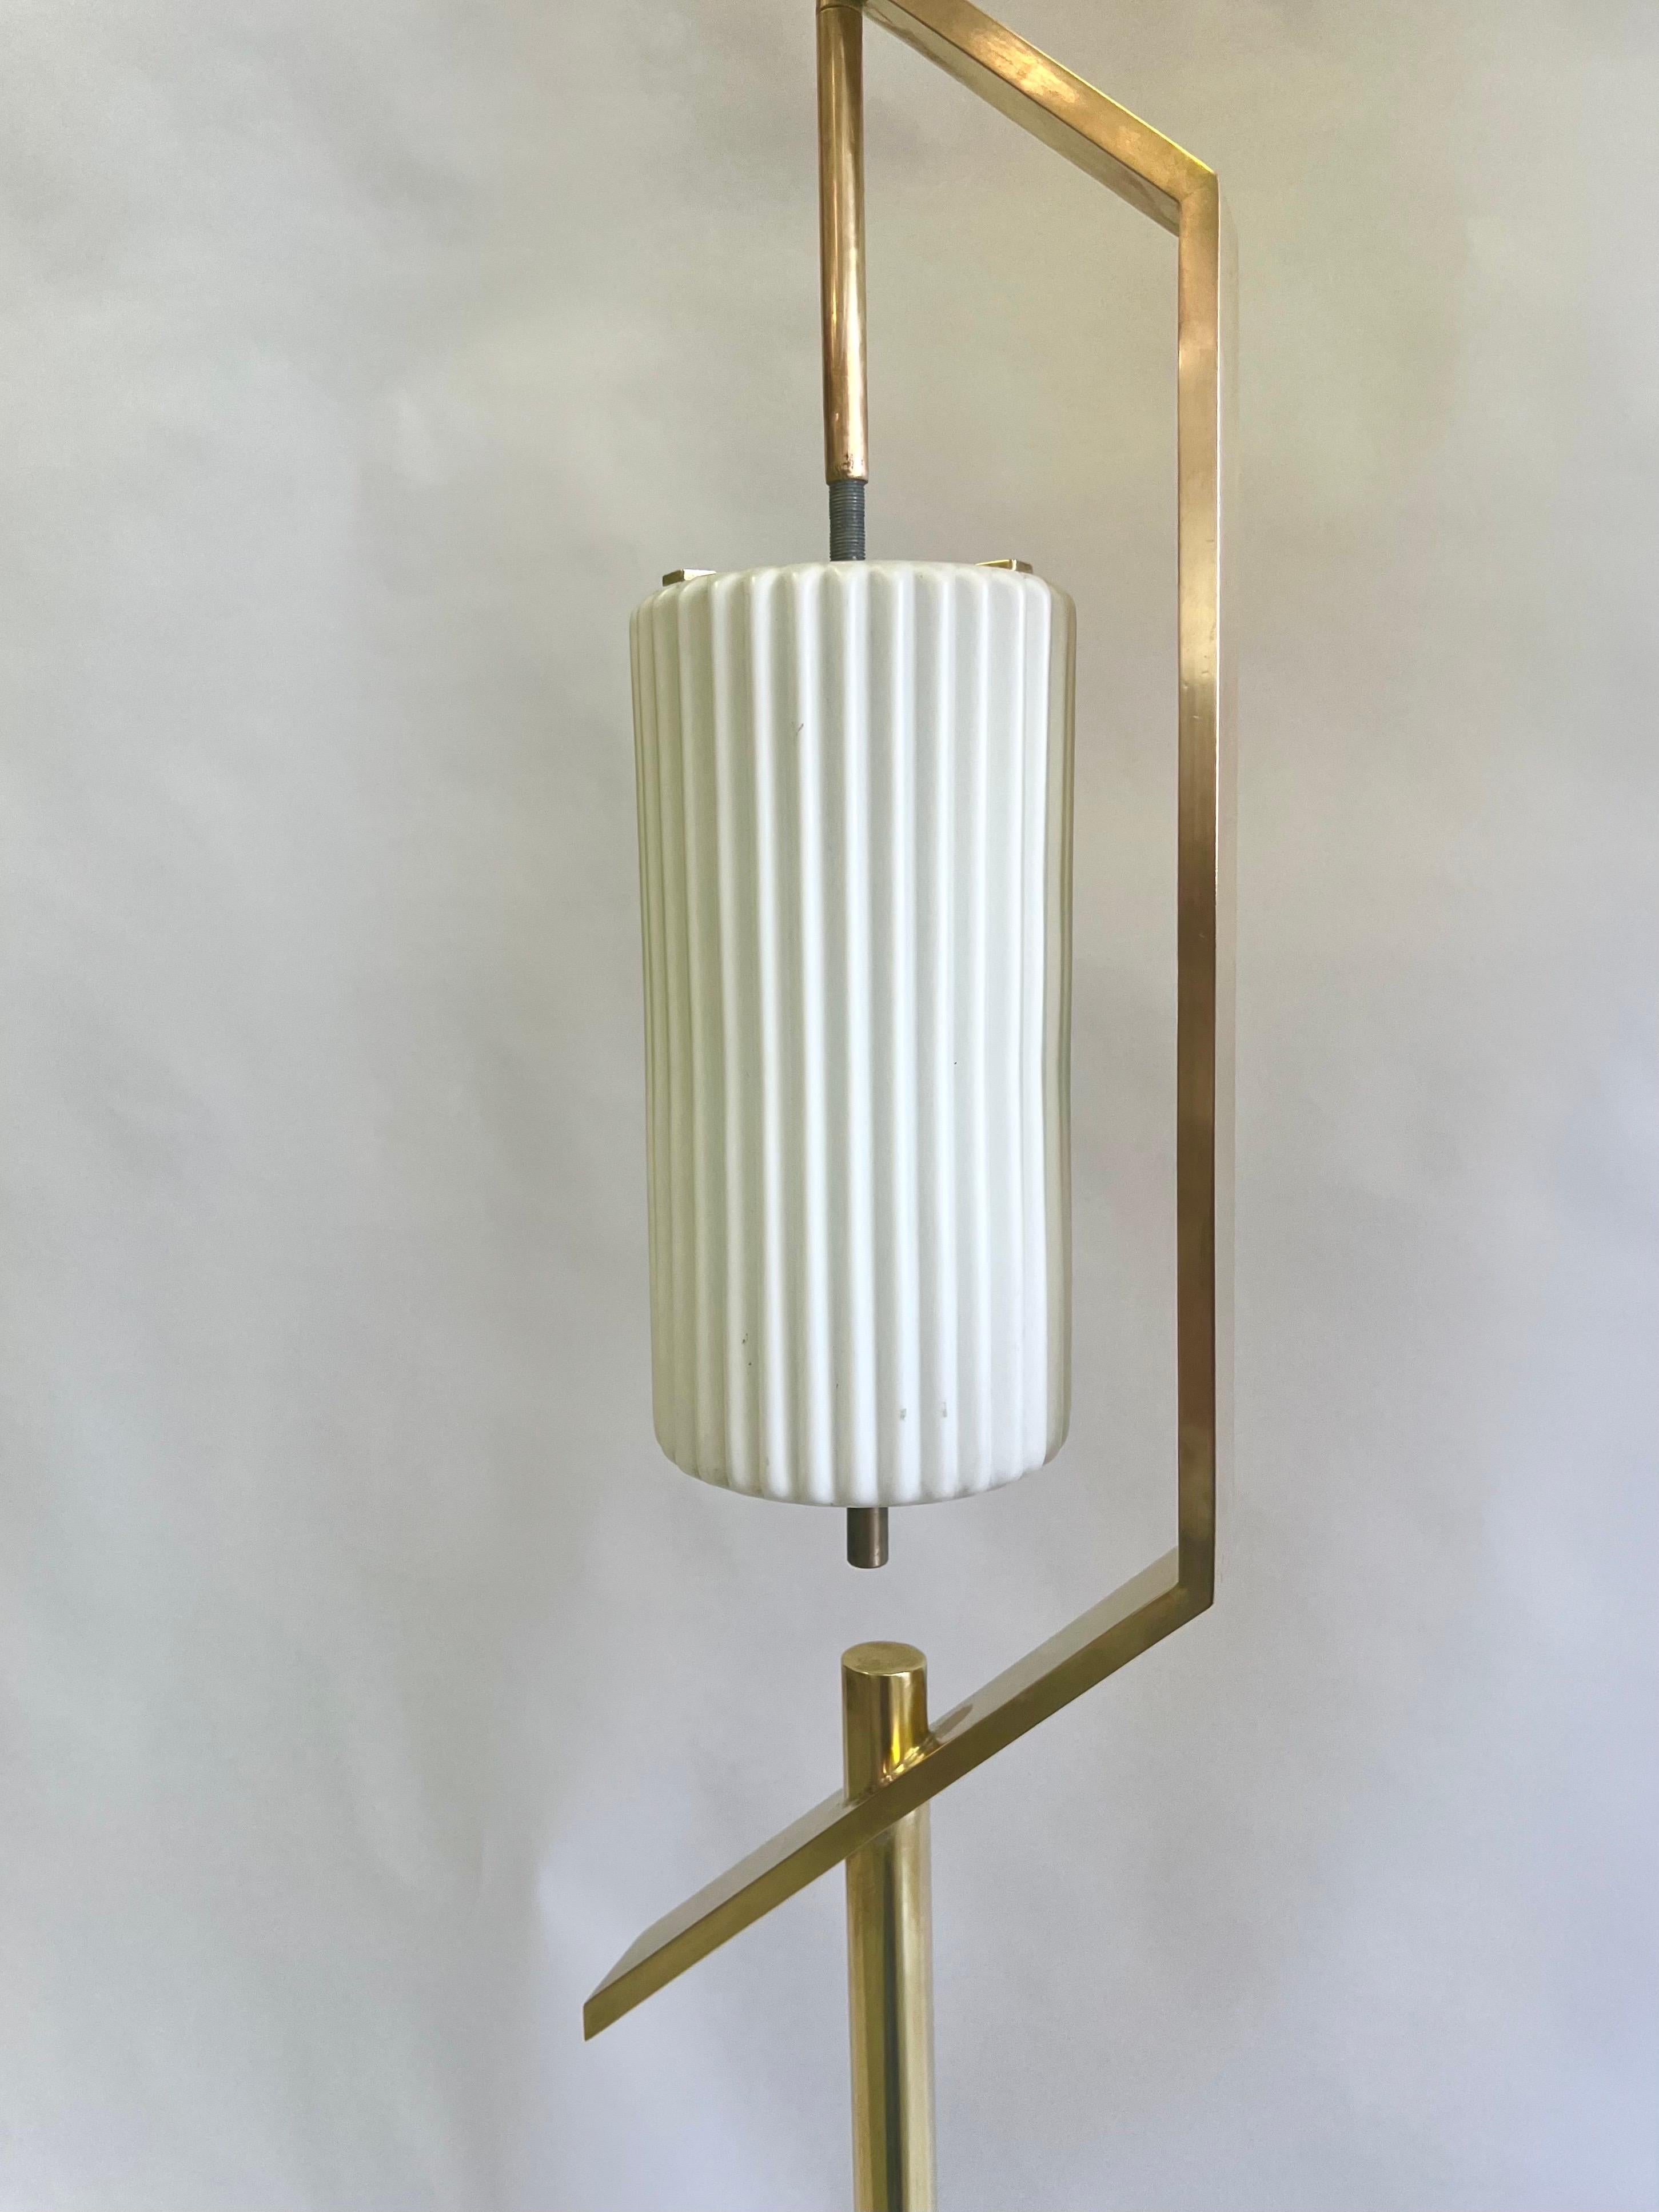 Rare & Iconic Italian MId-Century Floor Lamp #256 by Angelo Lelli for Arredoluce In Good Condition For Sale In New York, NY